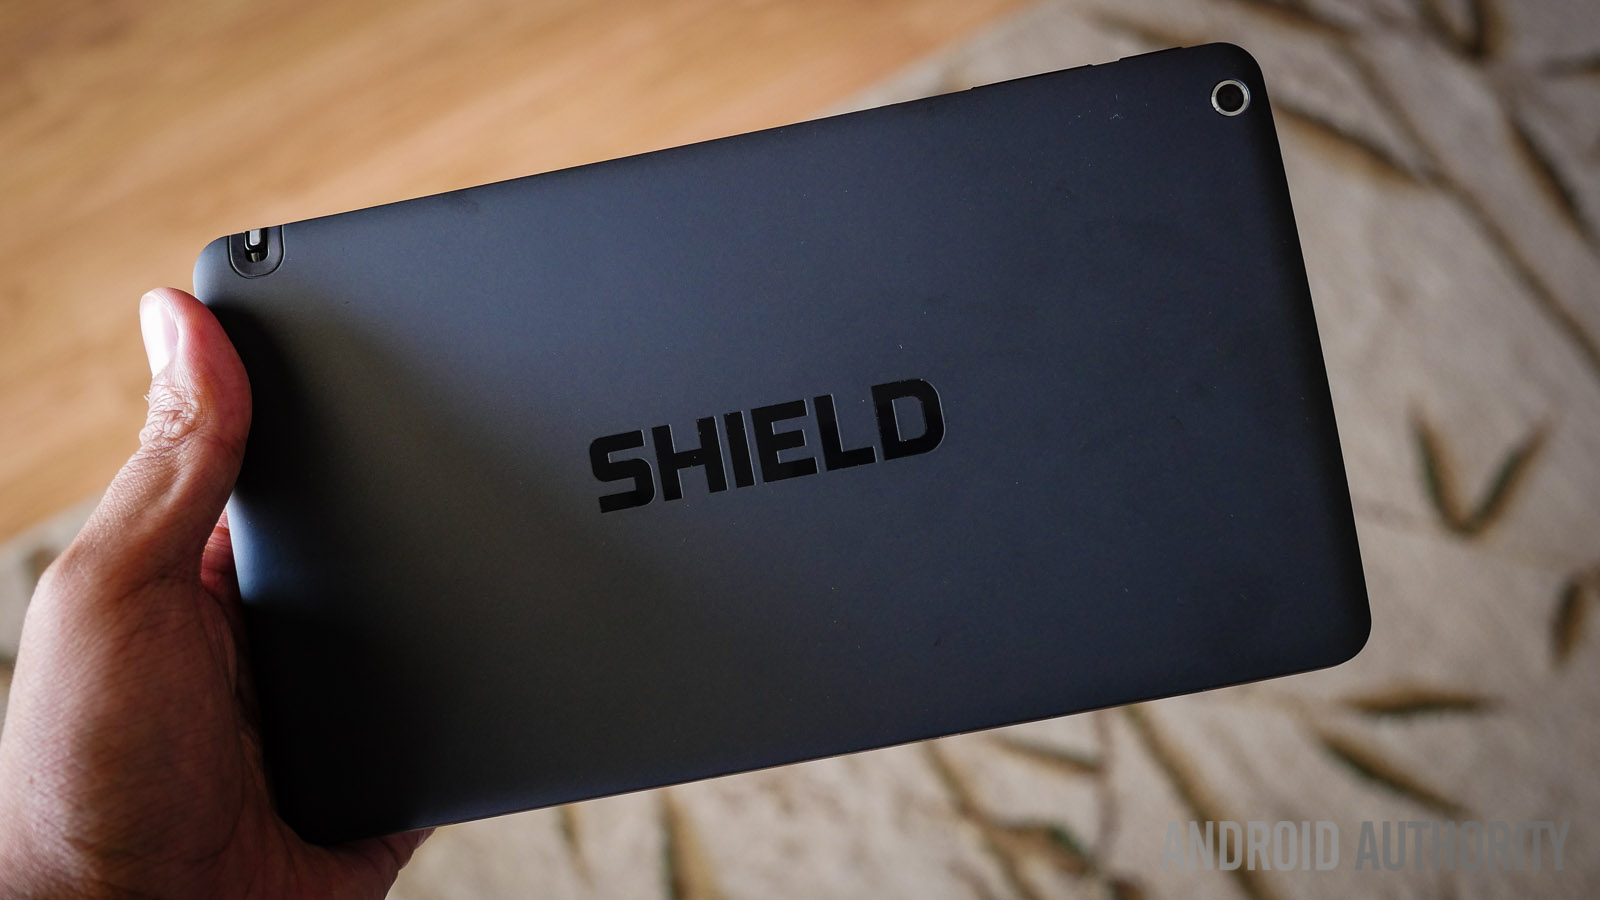 nvidia shield tablet first impressions (4 of 9)